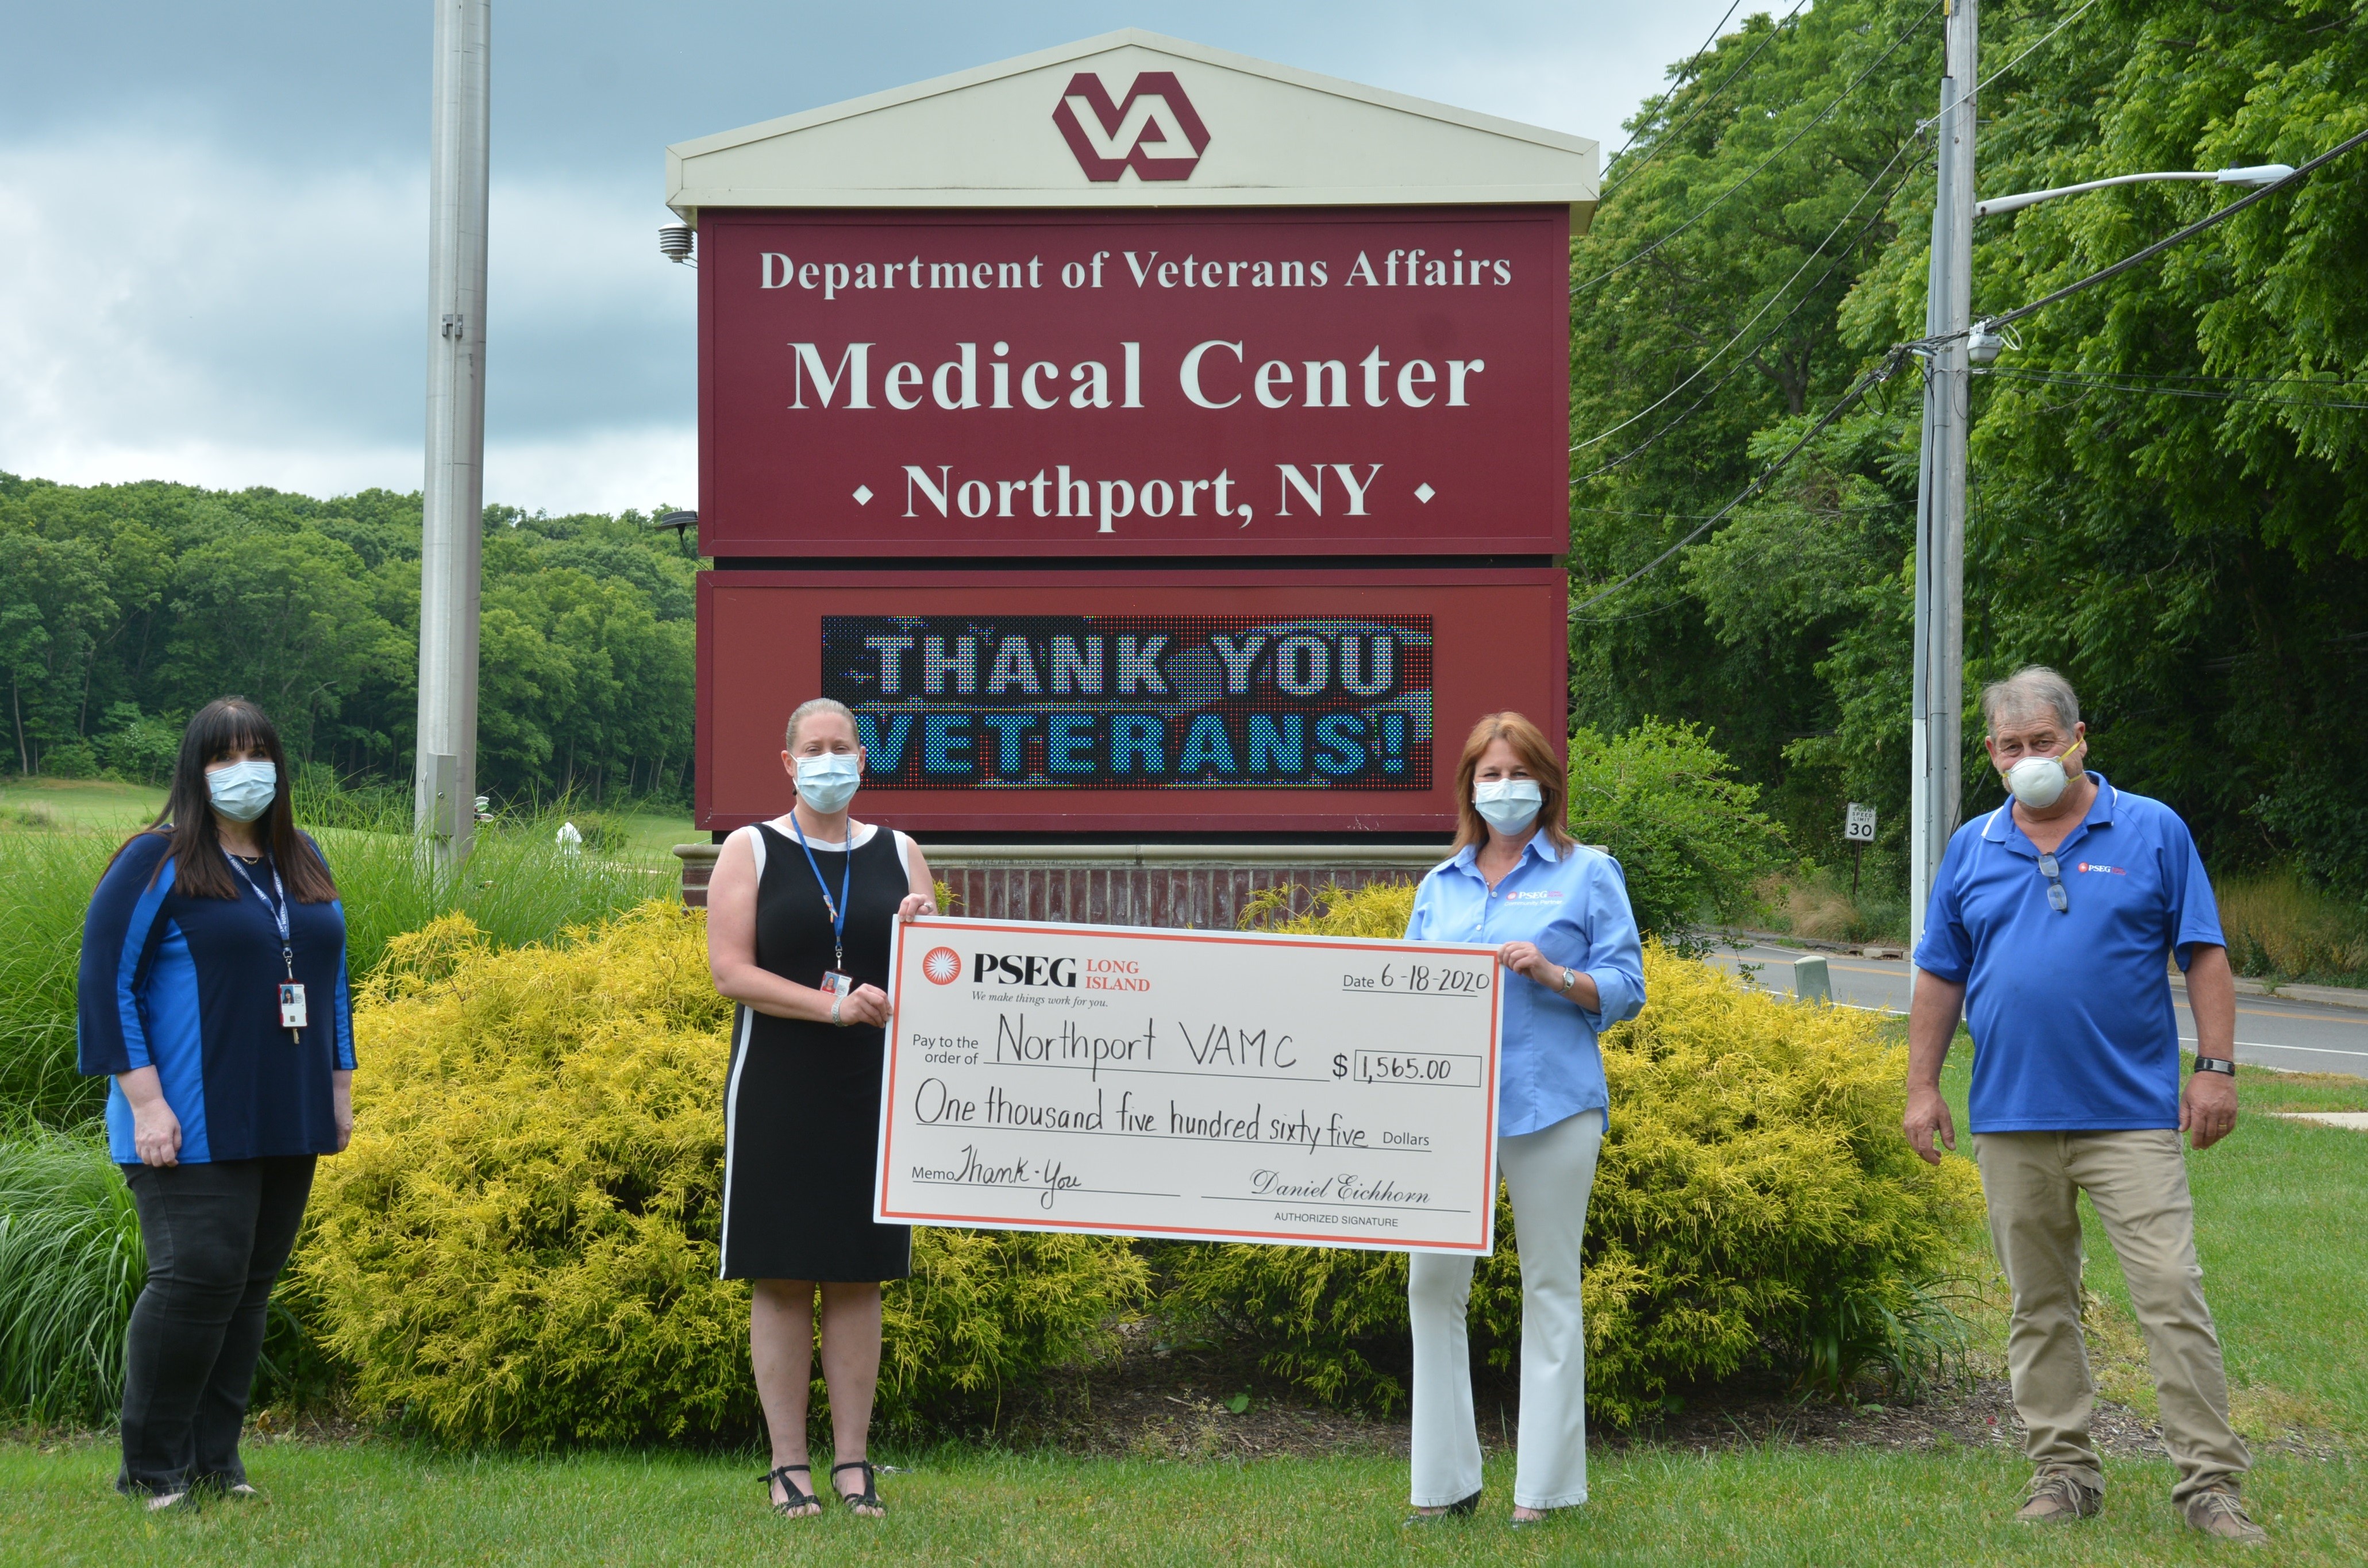 While socially distancing, Northport VAMC staff accepts ceremonial check representing $1,500 in gift cards donated by PSEG Long Island employees. The gift supports formerly homeless veterans by providing transportation to their lifesaving medical appointments. Pictured from left to right are: Northport VA’s Mary A. Kelly, LCSW, and Melanie Brodsky, LCSW, with PSEG Long Island’s Justine Sarni and Pete Hornick, who is a Northport resident.